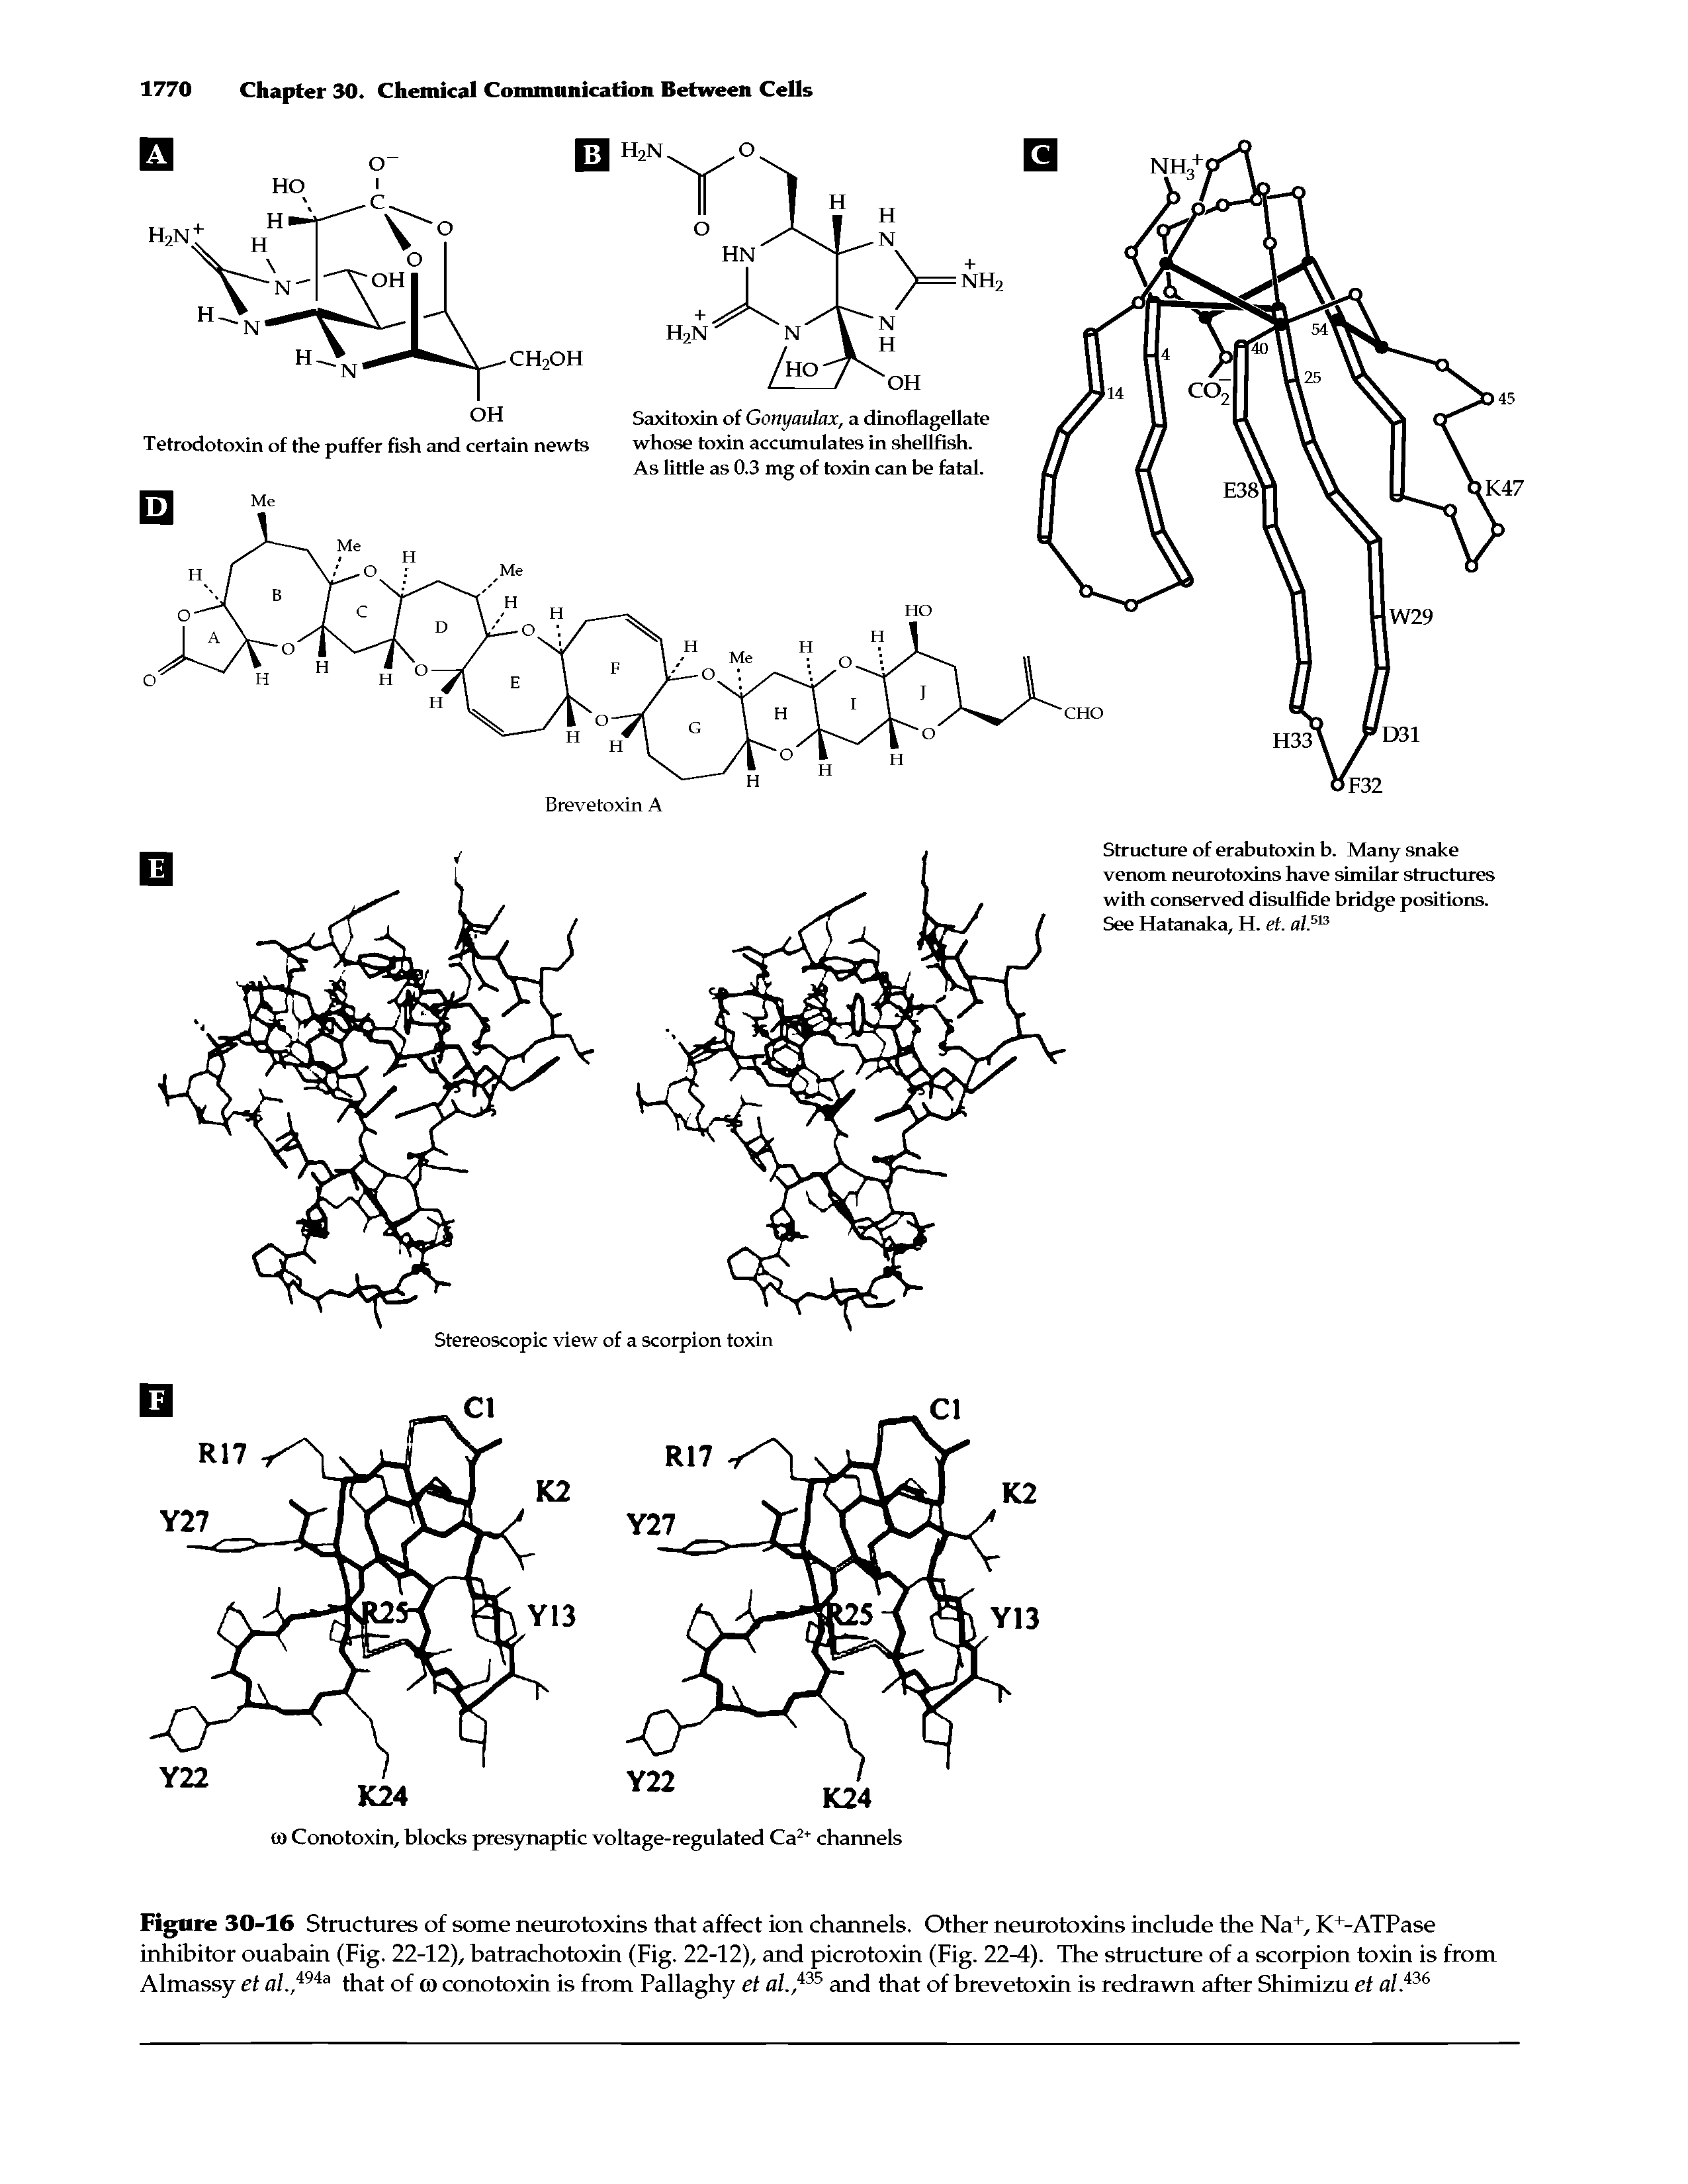 Figure 30-16 Structures of some neurotoxins that affect ion channels. Other neurotoxins include the Na+, K+-ATPase inhibitor ouabain (Fig. 22-12), batrachotoxin (Fig. 22-12), and picrotoxin (Fig. 22-4). The structure of a scorpion toxin is from Almassy et al.,i9ia that of to conotoxin is from Pallaghy et al.,i35 and that of brevetoxin is redrawn after Shimizu et al.i36...